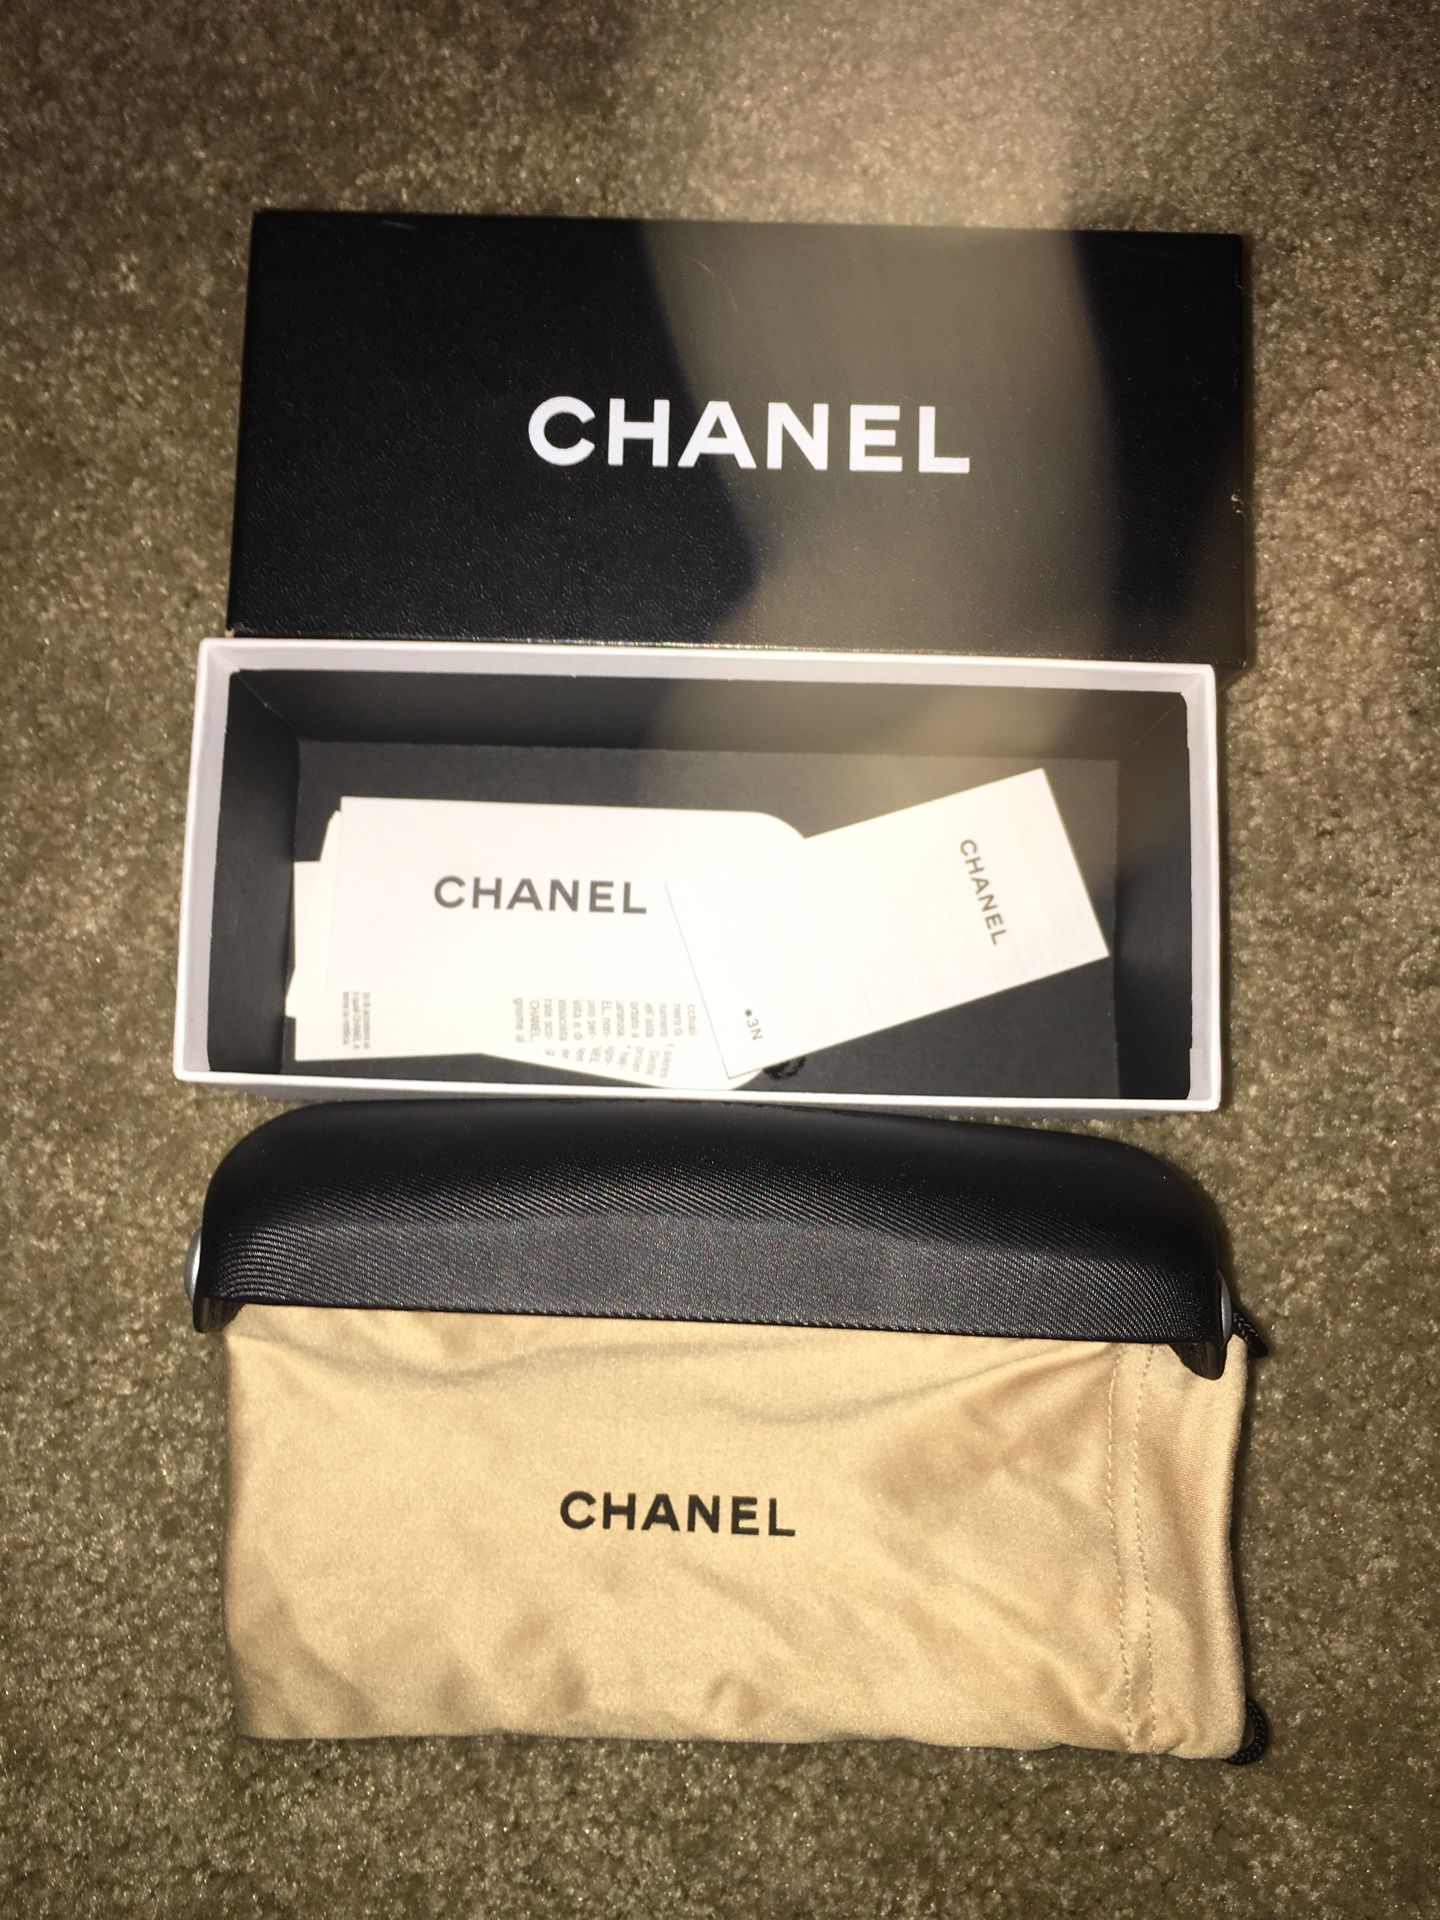 Chanel sunglass bag, holder and box. No glasses. Never used